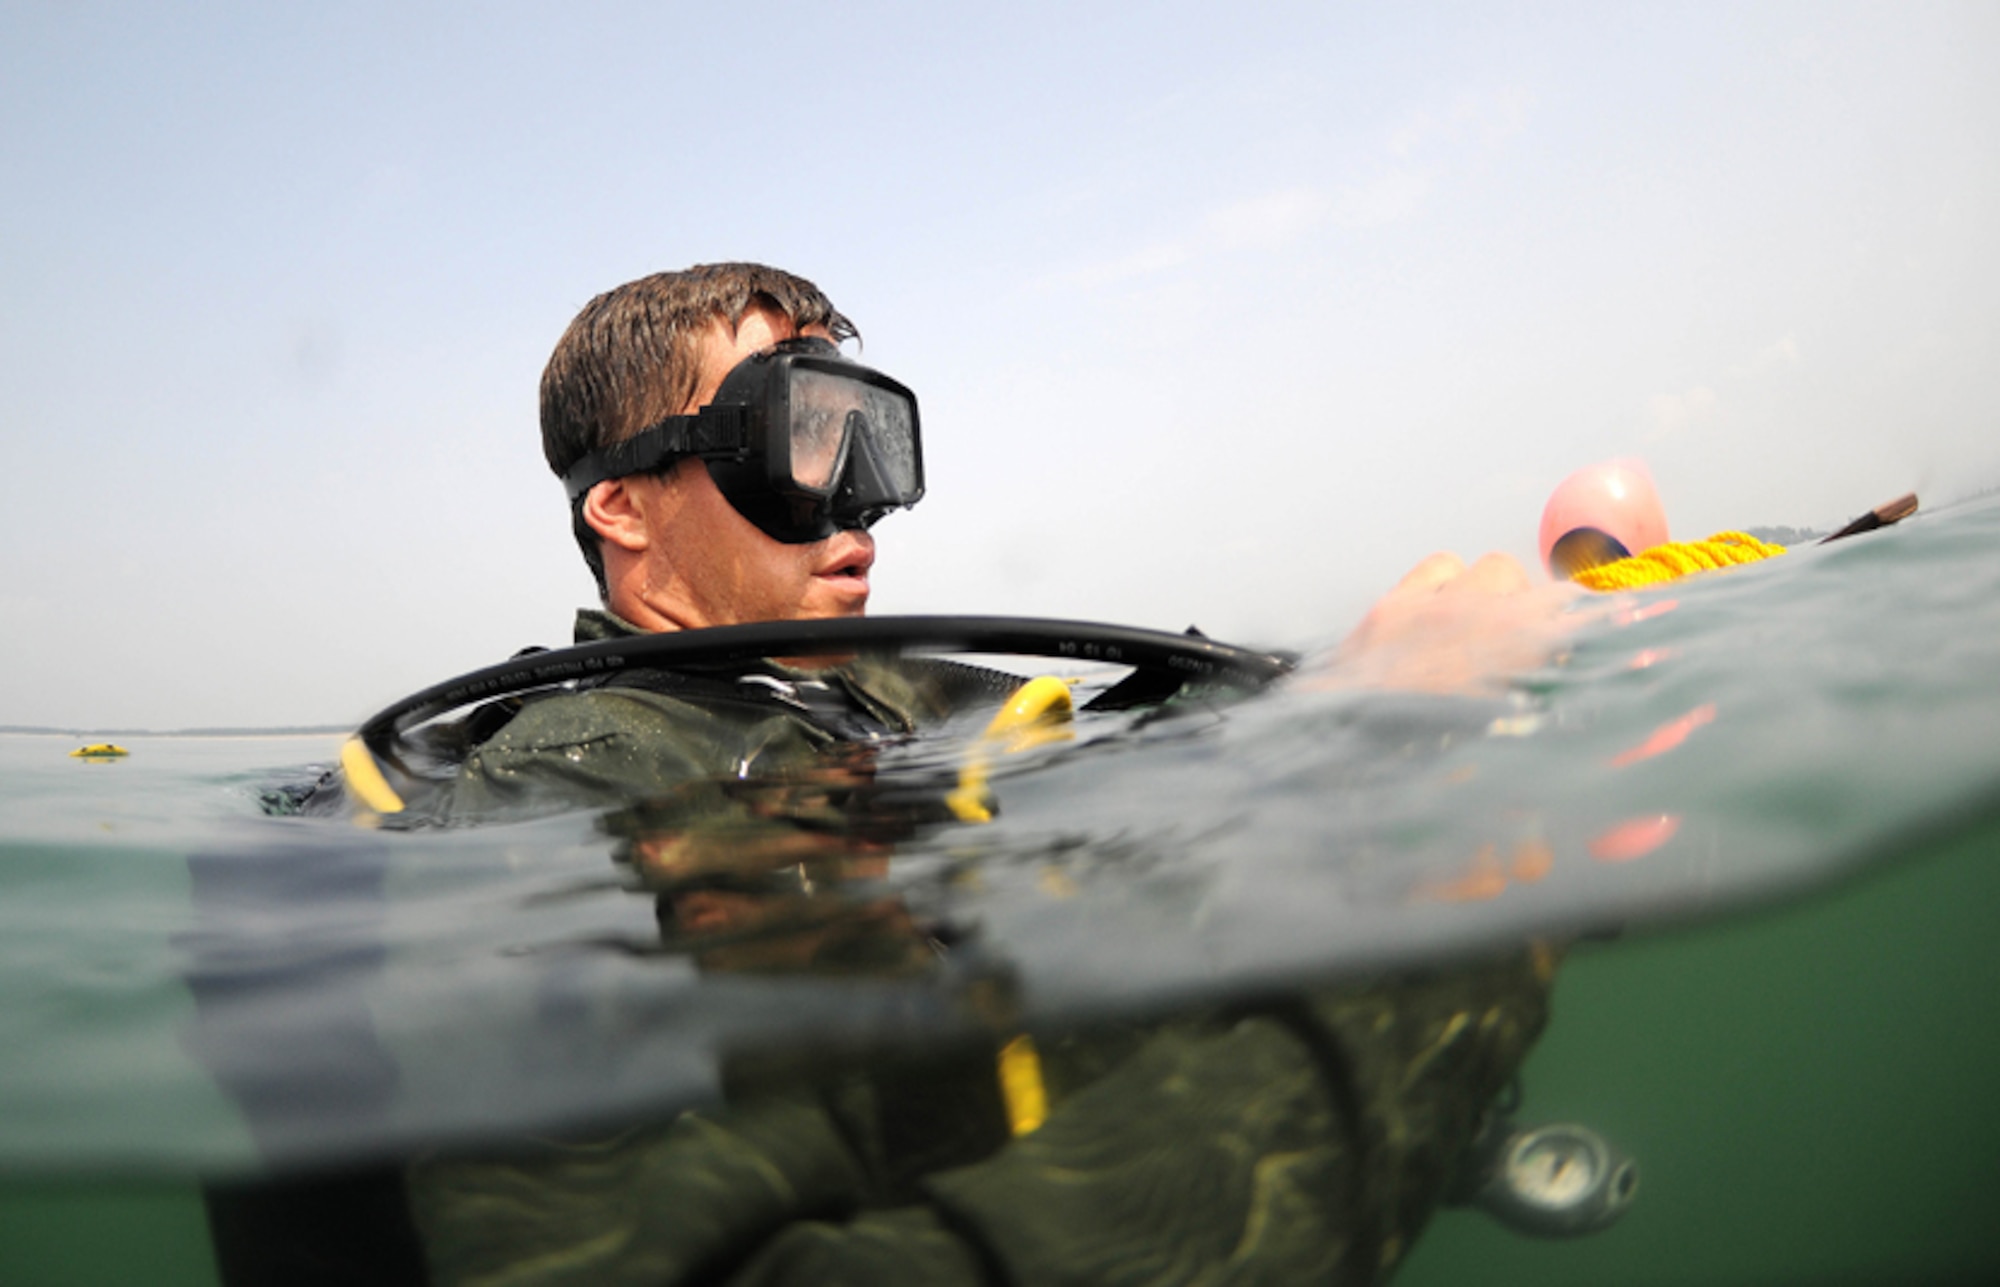 Petty Officer 3rd Class Joshua Westman, a diver with Mobile Diving Salvage Unit 1, secures his dive search line before descending on a scuba dive in support of a Joint POW/MIA Accounting Command recovery mission in the Nghe An province, Socialist Republic of Vietnam. The mission of JPAC is to achieve the fullest possible accounting of all Americans missing as a result of the nation's past conflicts. (JPAC photo by Mass Communication Specialist 1st Class Anderson Bomjardim/Released)